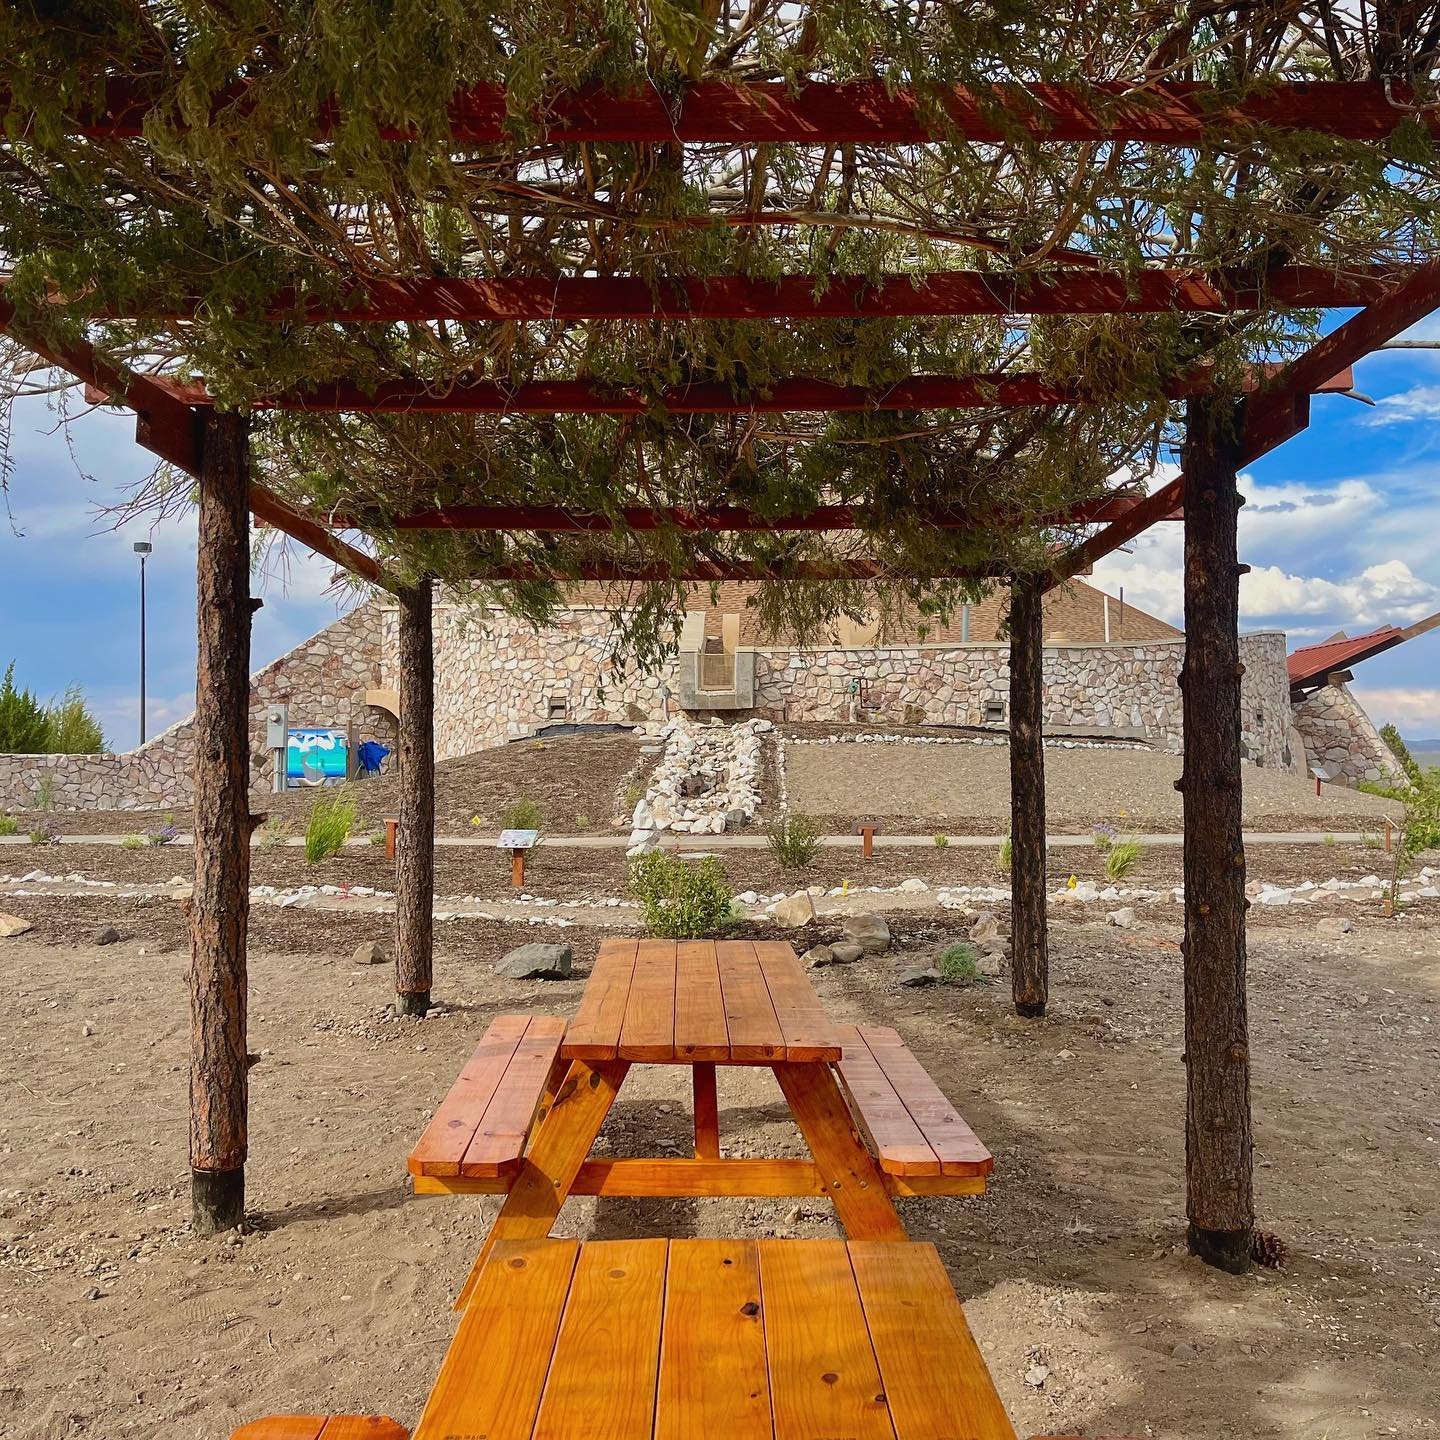 Check out these close-ups of the haba/shade structure! Coyote Willow (Salix Exigua) branches are layered in a manner that provides a cooling shade from direct sunlight.🌞The columns of the structure are made of consciously harvested Jeffrey Pine (Pin